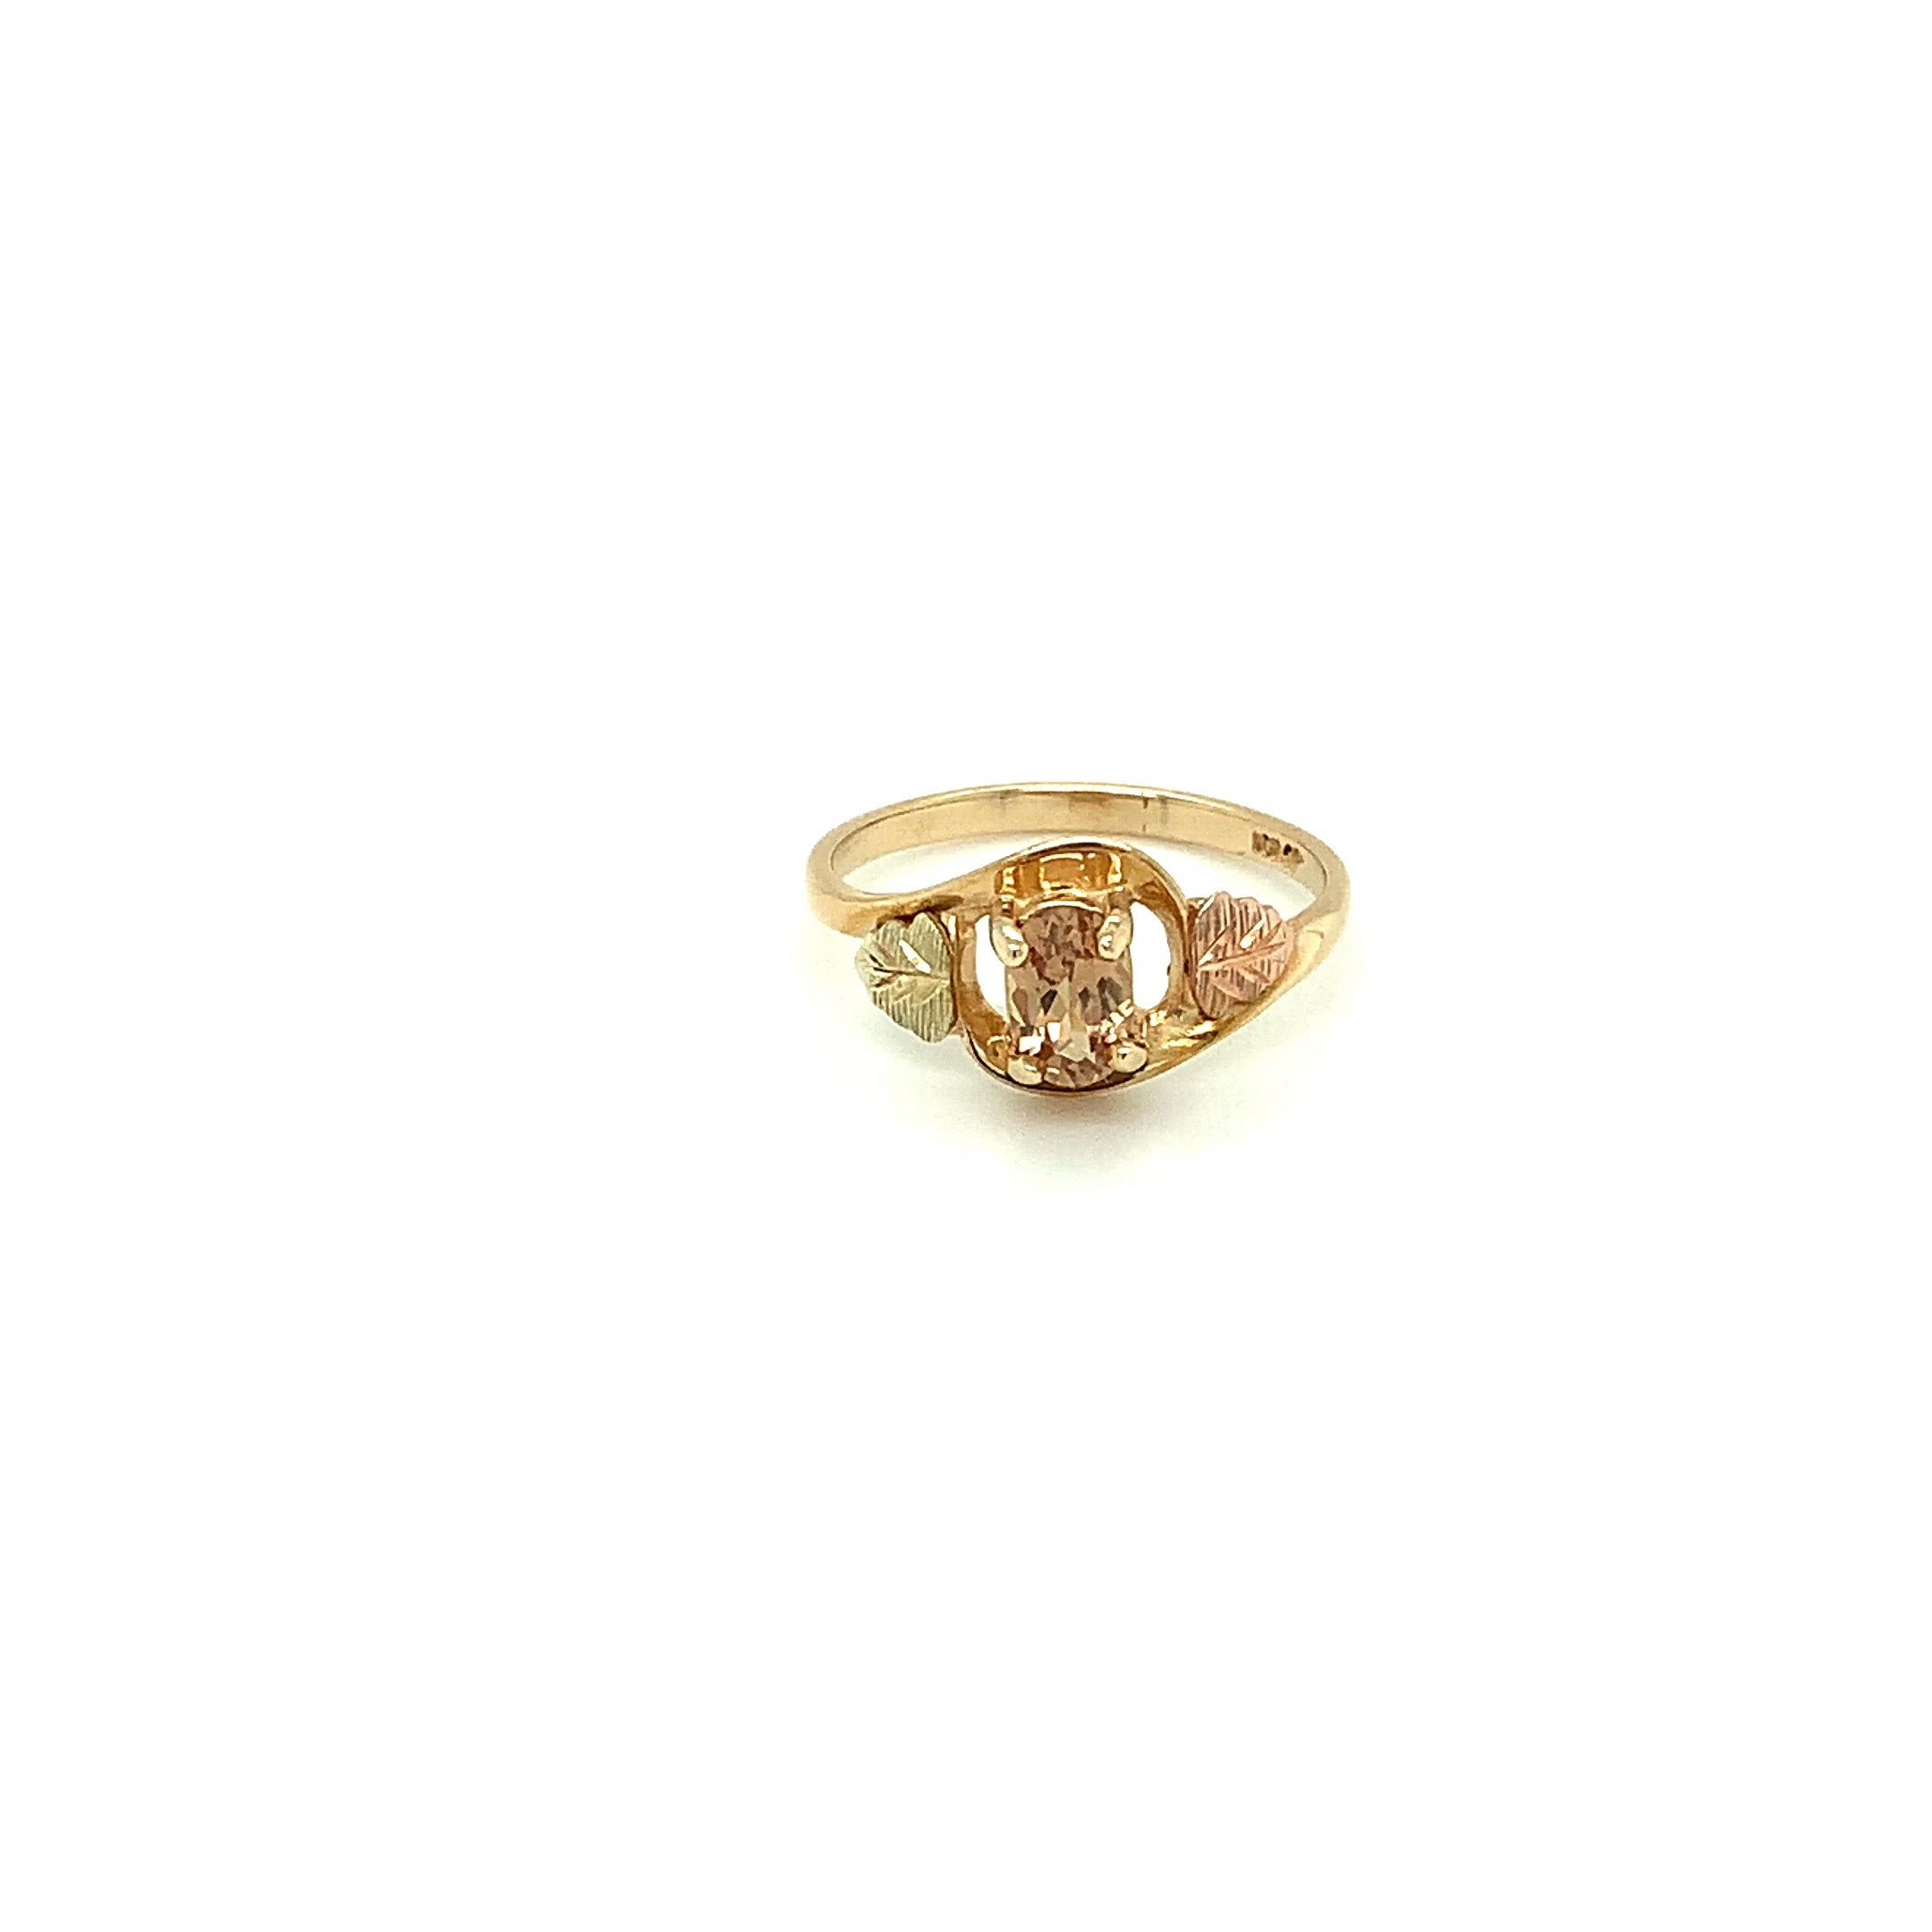 Natural Padparadscha Sapphire Ring 10K Solid Gold .61ct Black Hills Gold Ring Black Hills Dakota Ring Solitaire Ring Birthstone Ring Nature